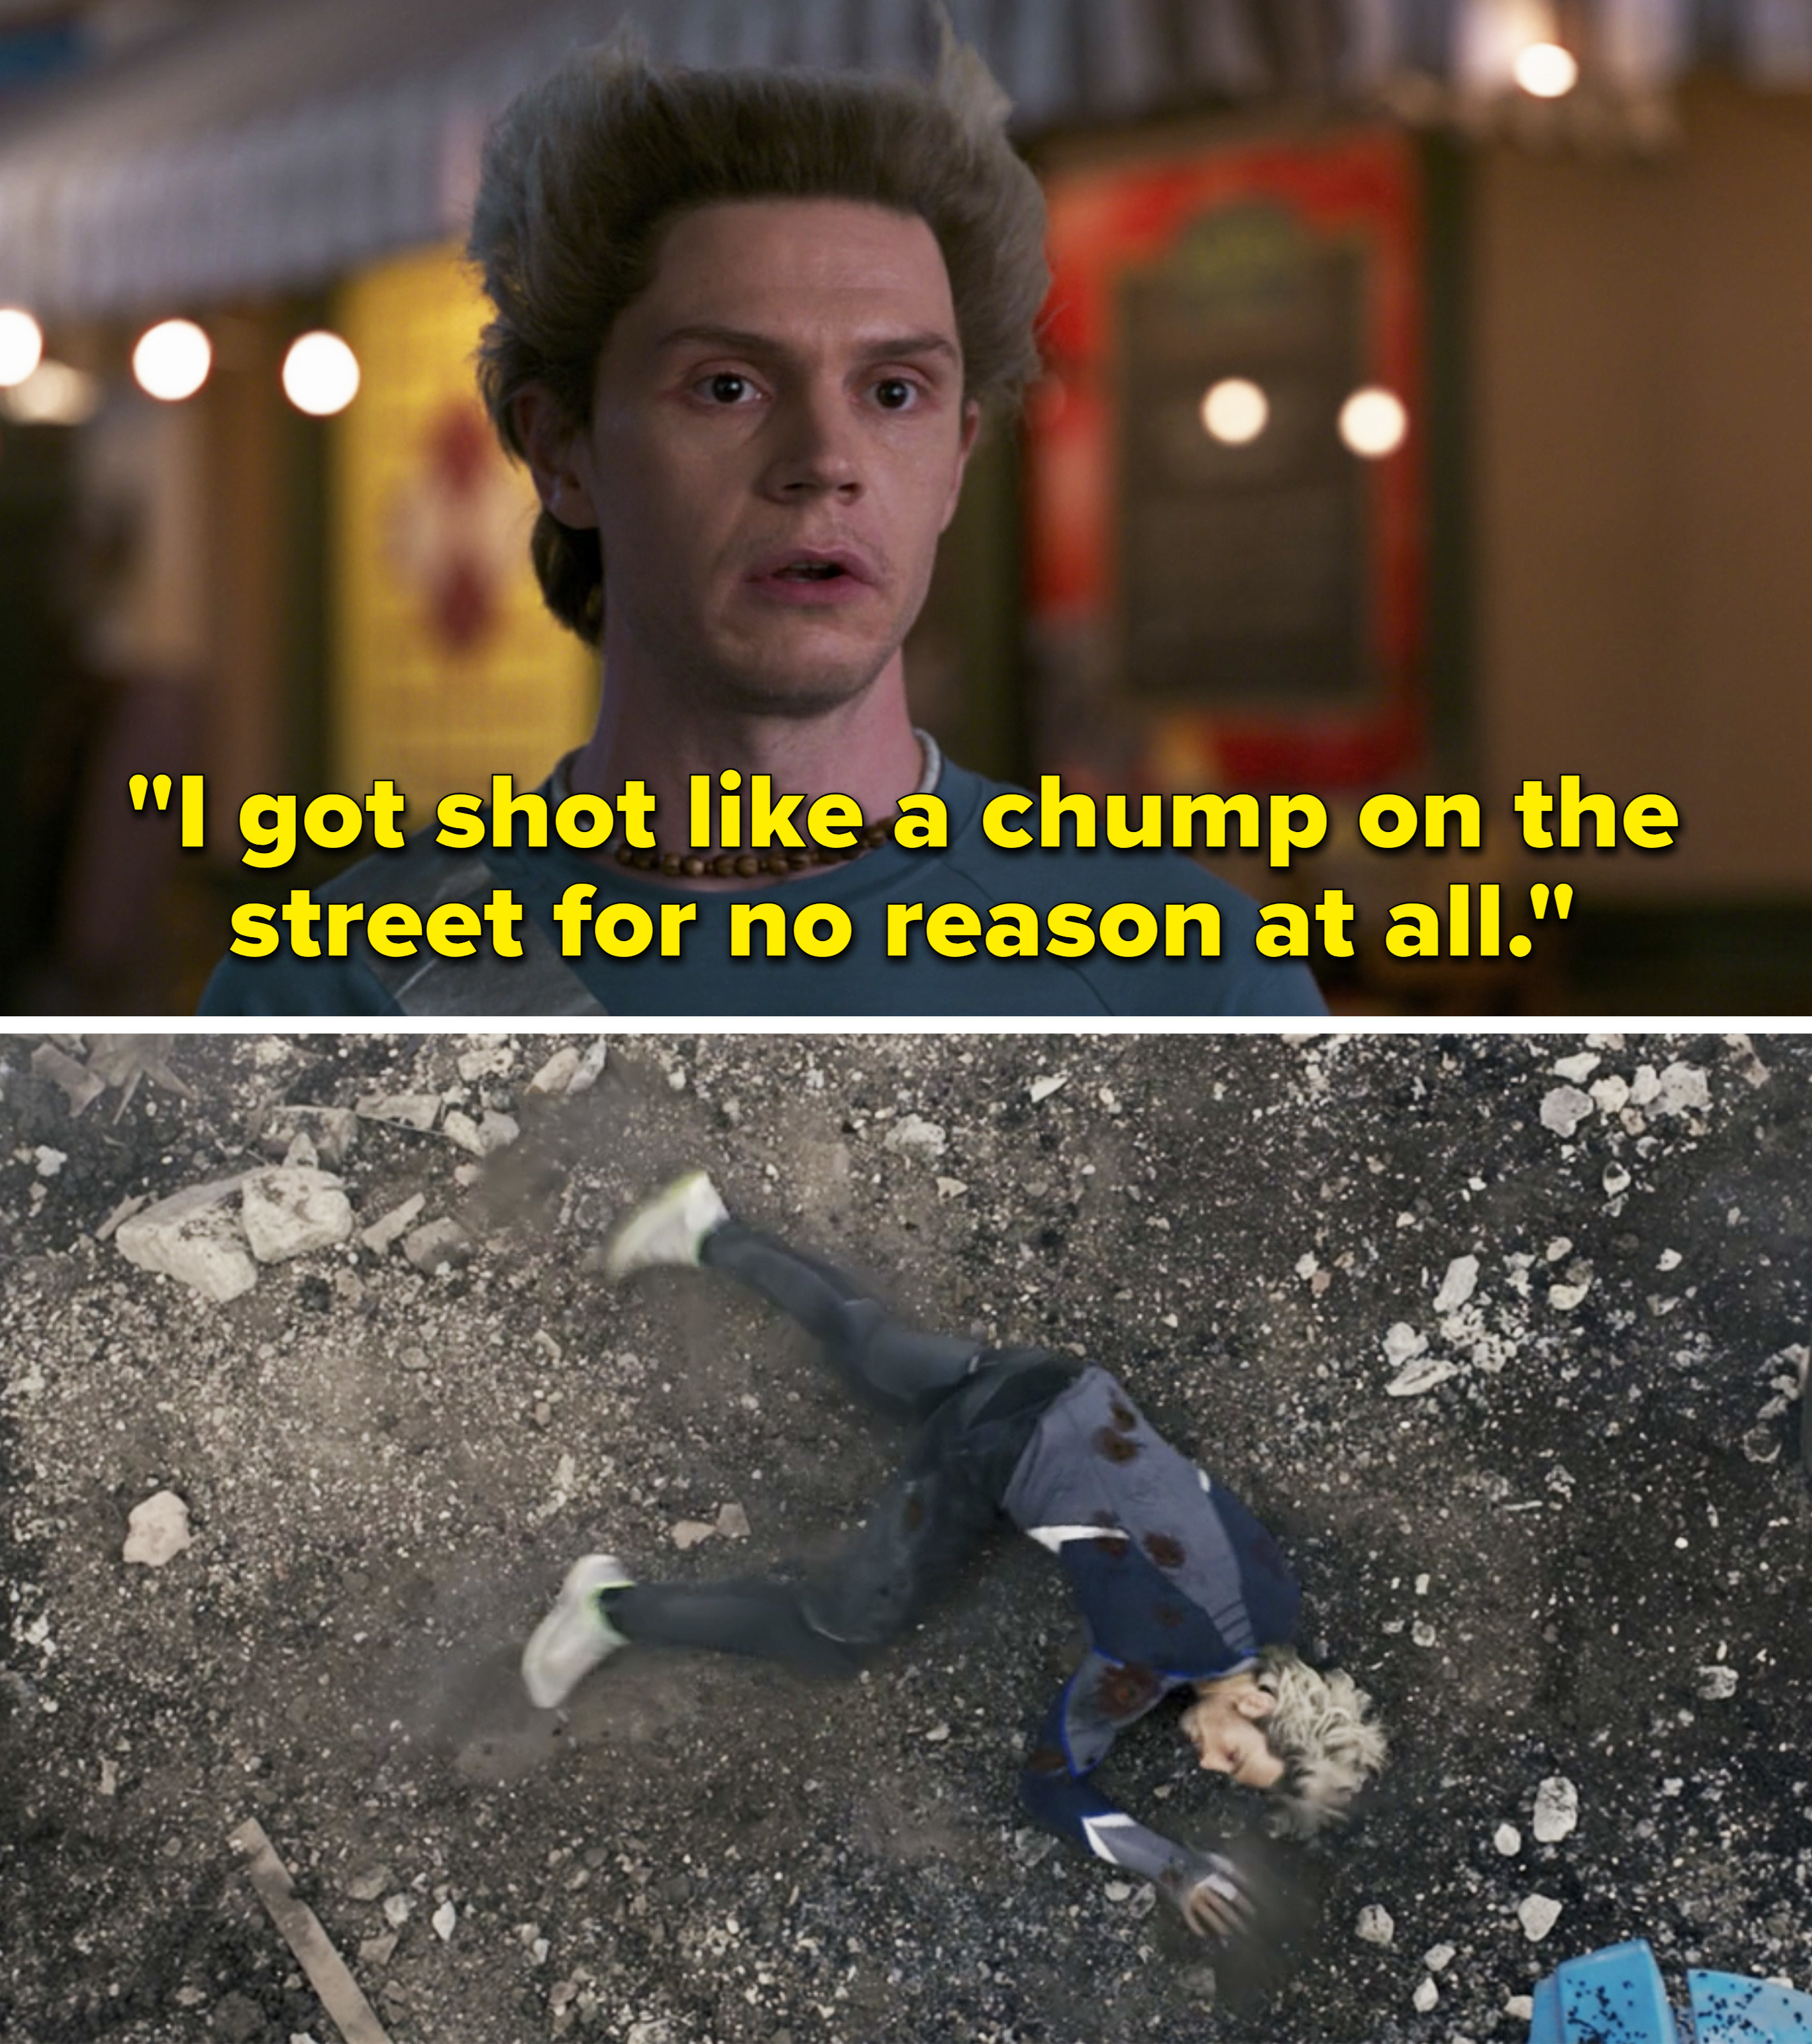 Pietro says &quot;I got shot like a chump on the street for no reason at all&quot;